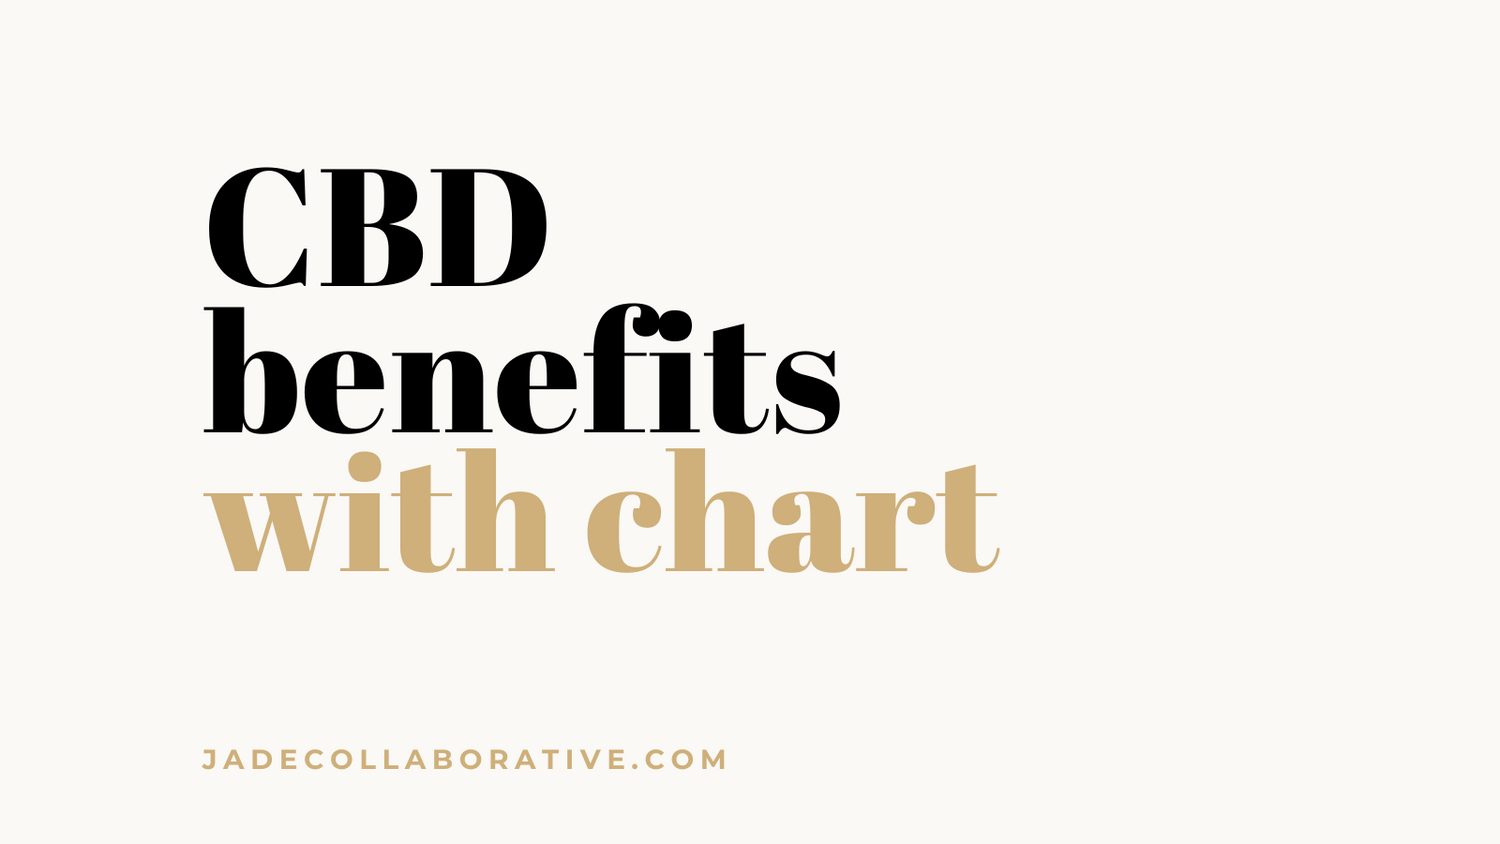 What are the benefits of CBD? CBD benefits with chart by Jade Collaborative